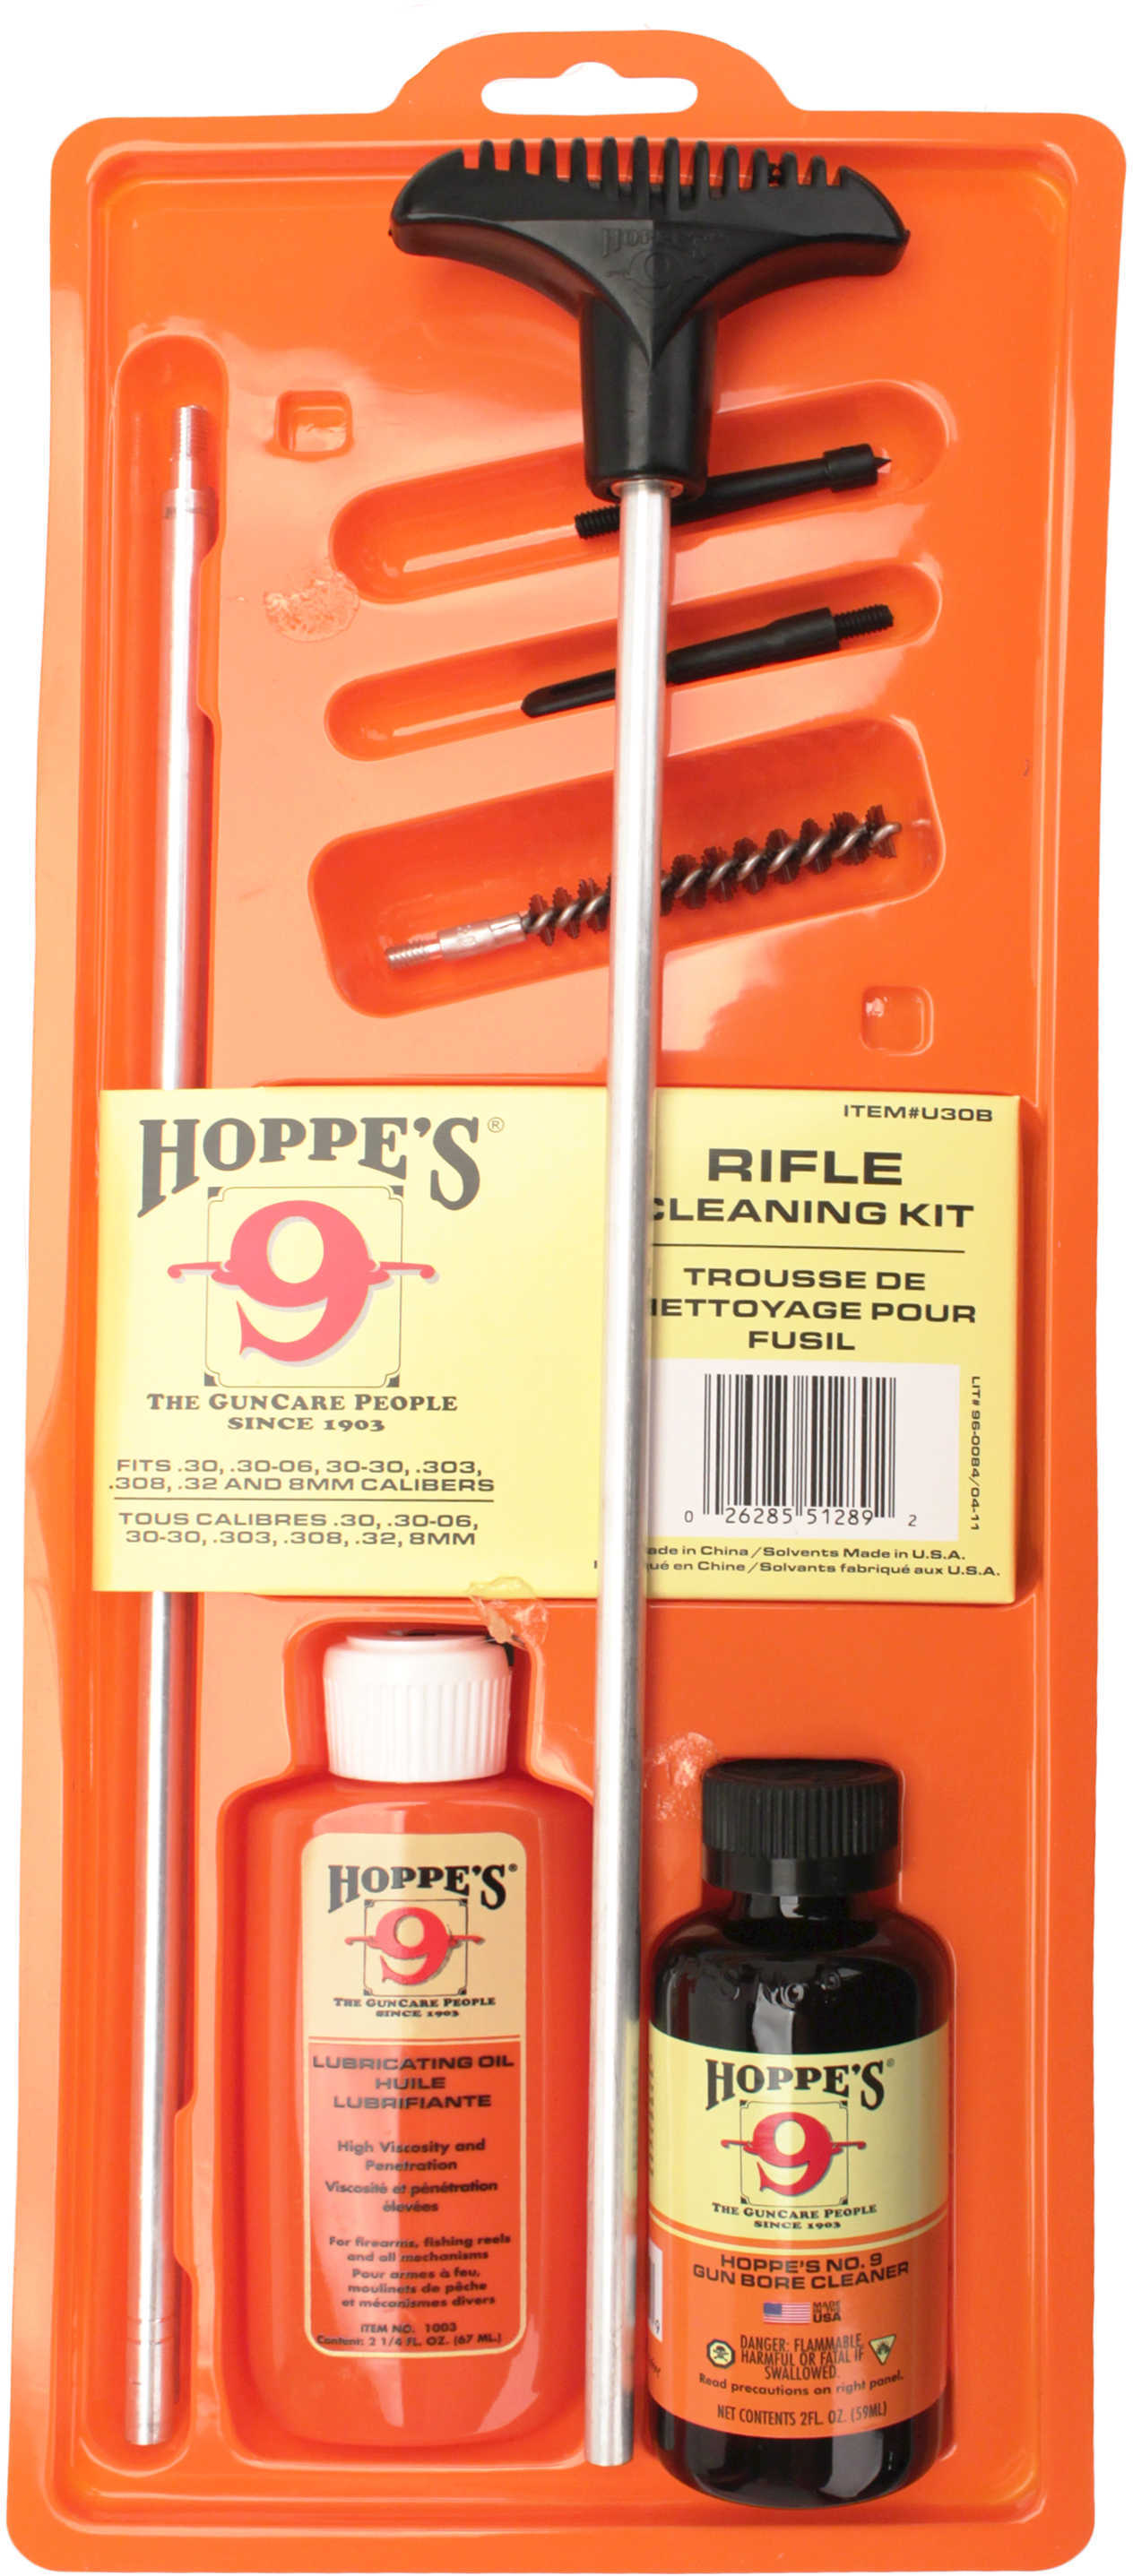 Hoppes Rifle Cleaning Kit - Clamshell .30 30-06 30-30 .303 .308 .32 8mm Contains: 2 Oz No. 9 Solvent 2.25 Lub